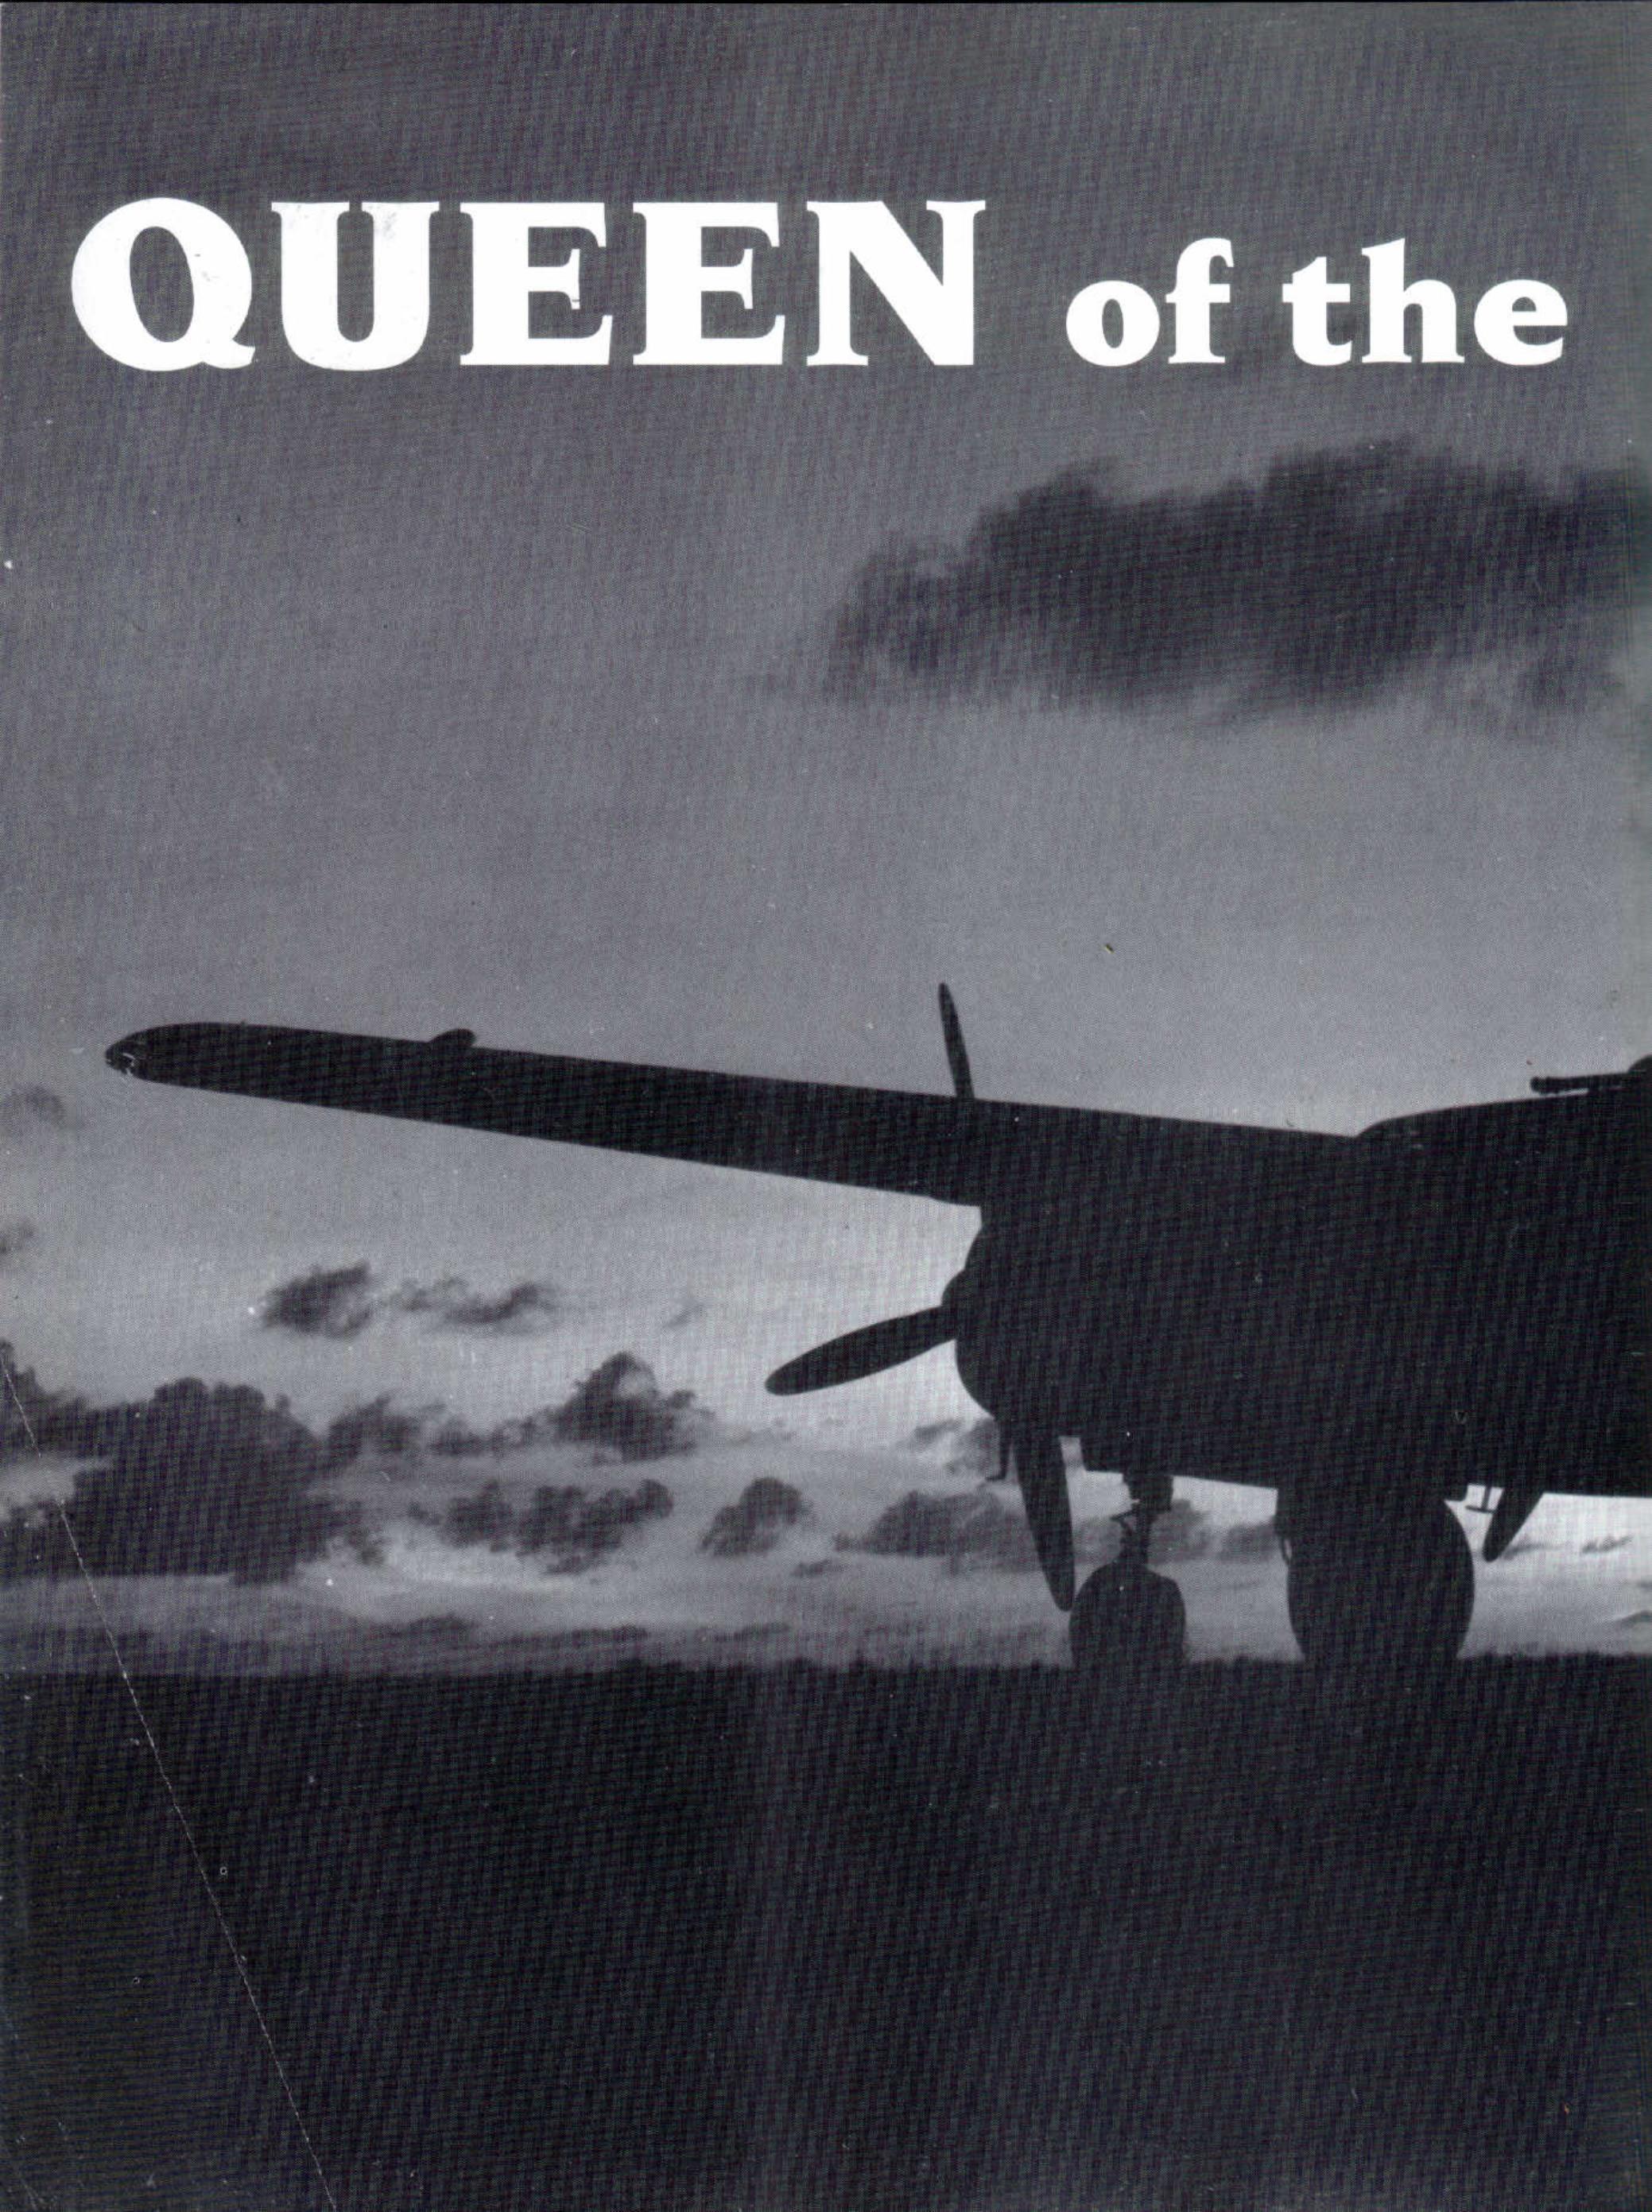 Queen of the Midnight Skies by The Story of America's Air Force Night Fighters